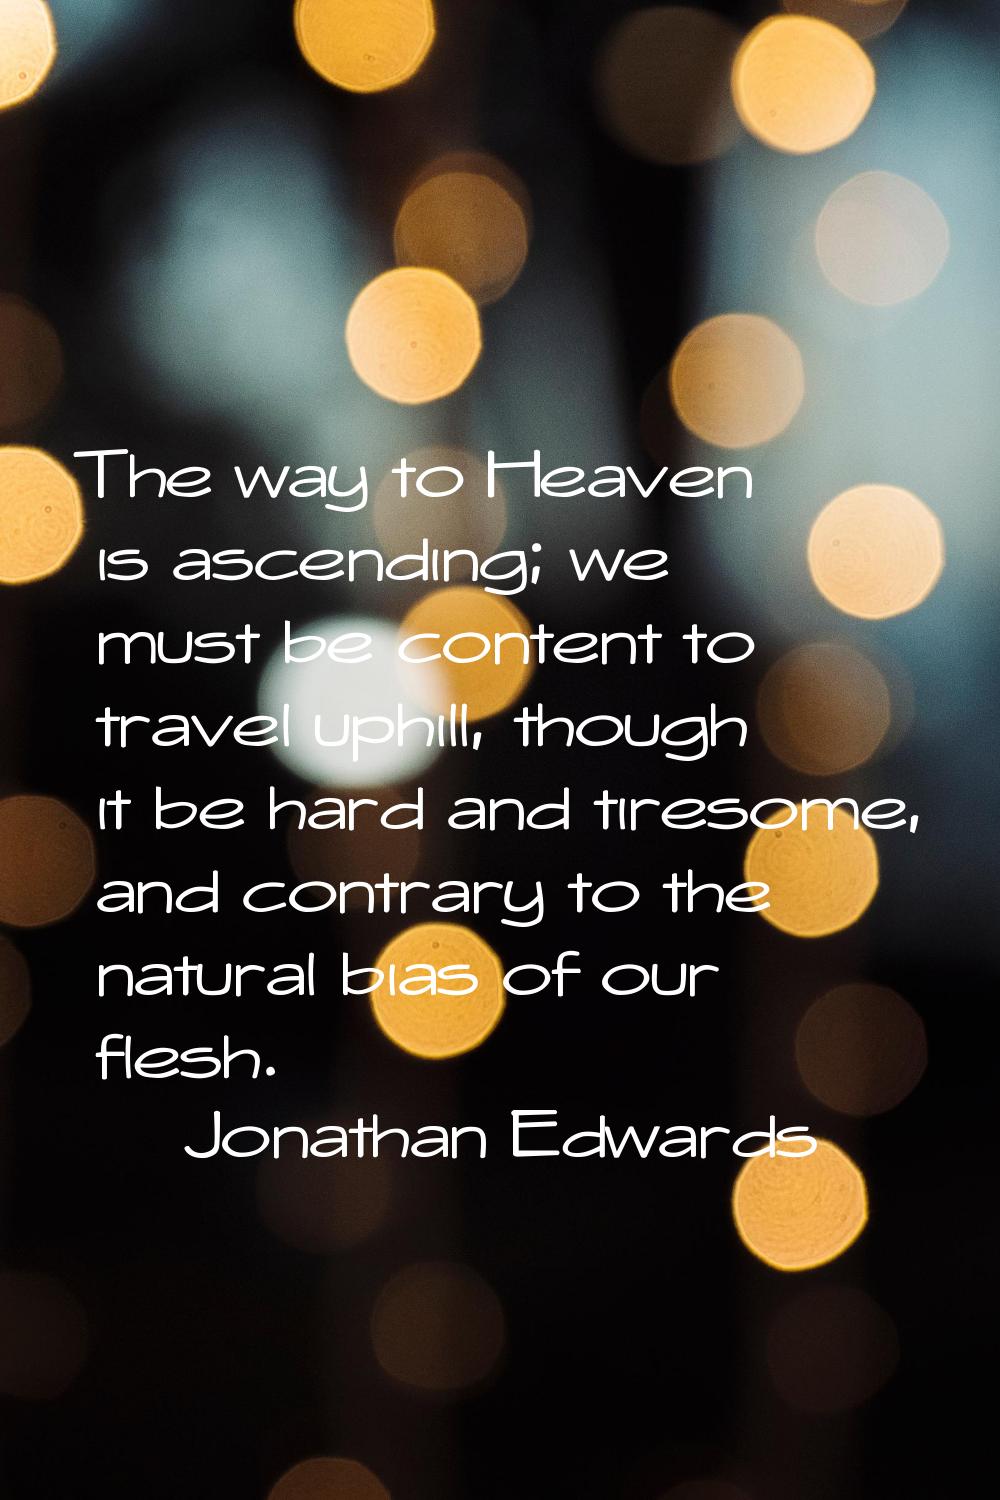 The way to Heaven is ascending; we must be content to travel uphill, though it be hard and tiresome